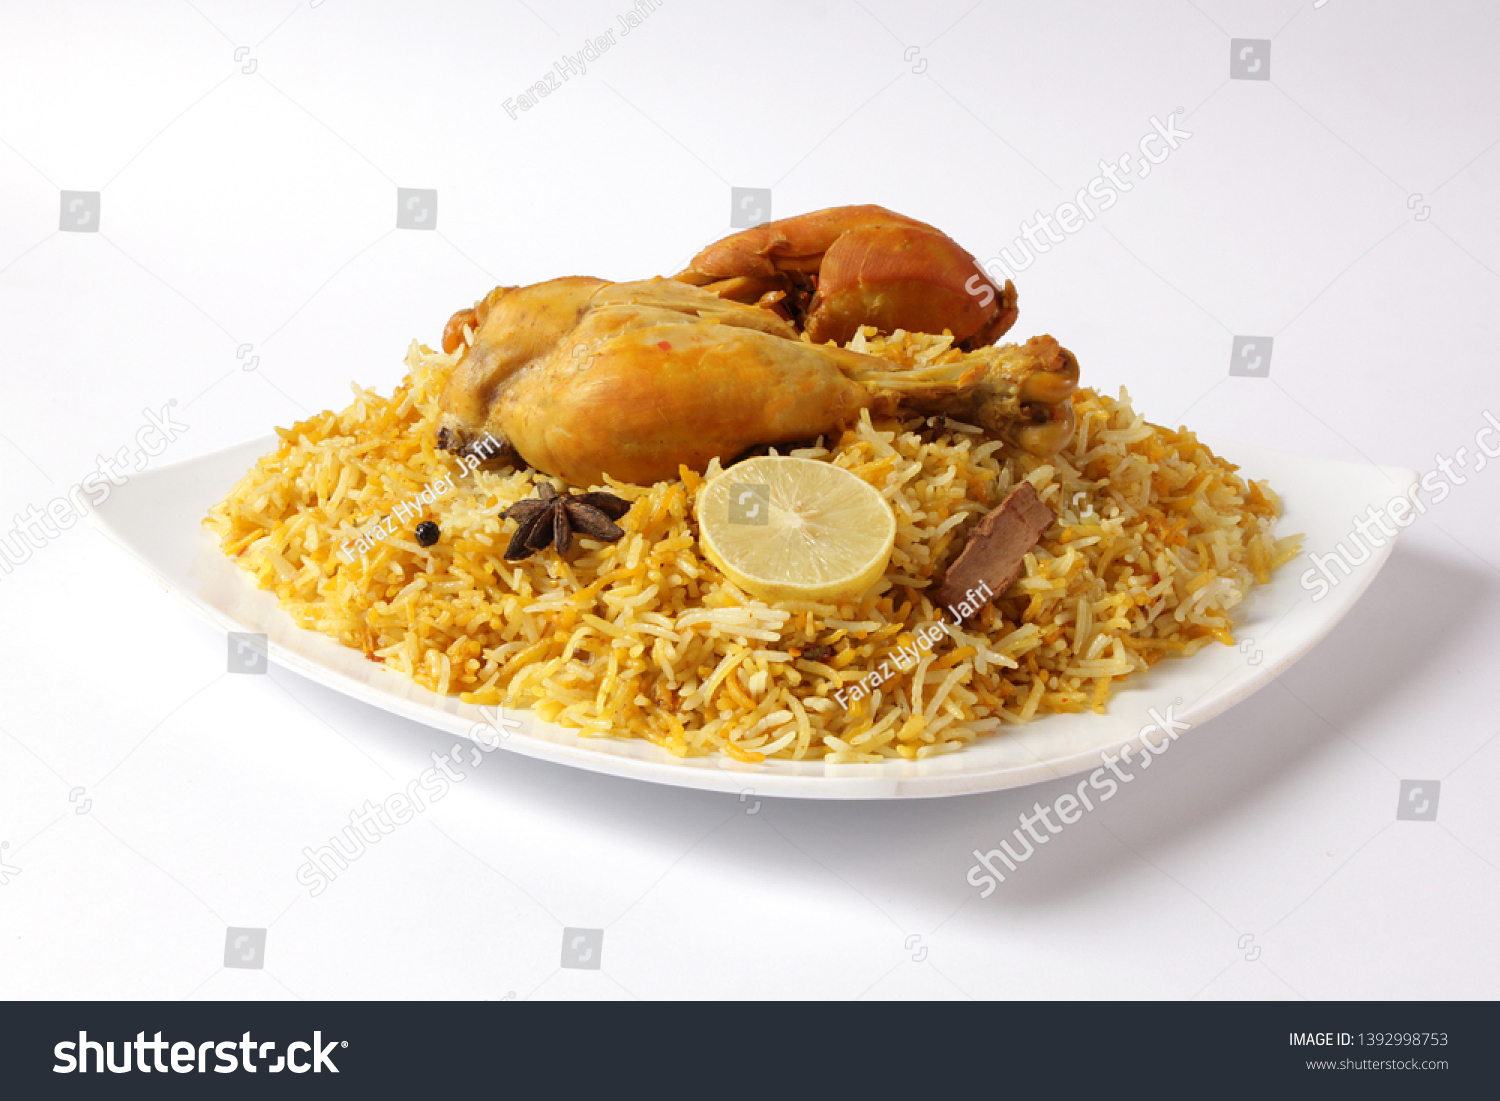 Isolated delicious spicy chicken biryani in white bowl on white background, Indian or Pakistani ramzan food. Beautiful view of traditional spicy indian food, Iftar meal, Ramadan dinner. #1392998753